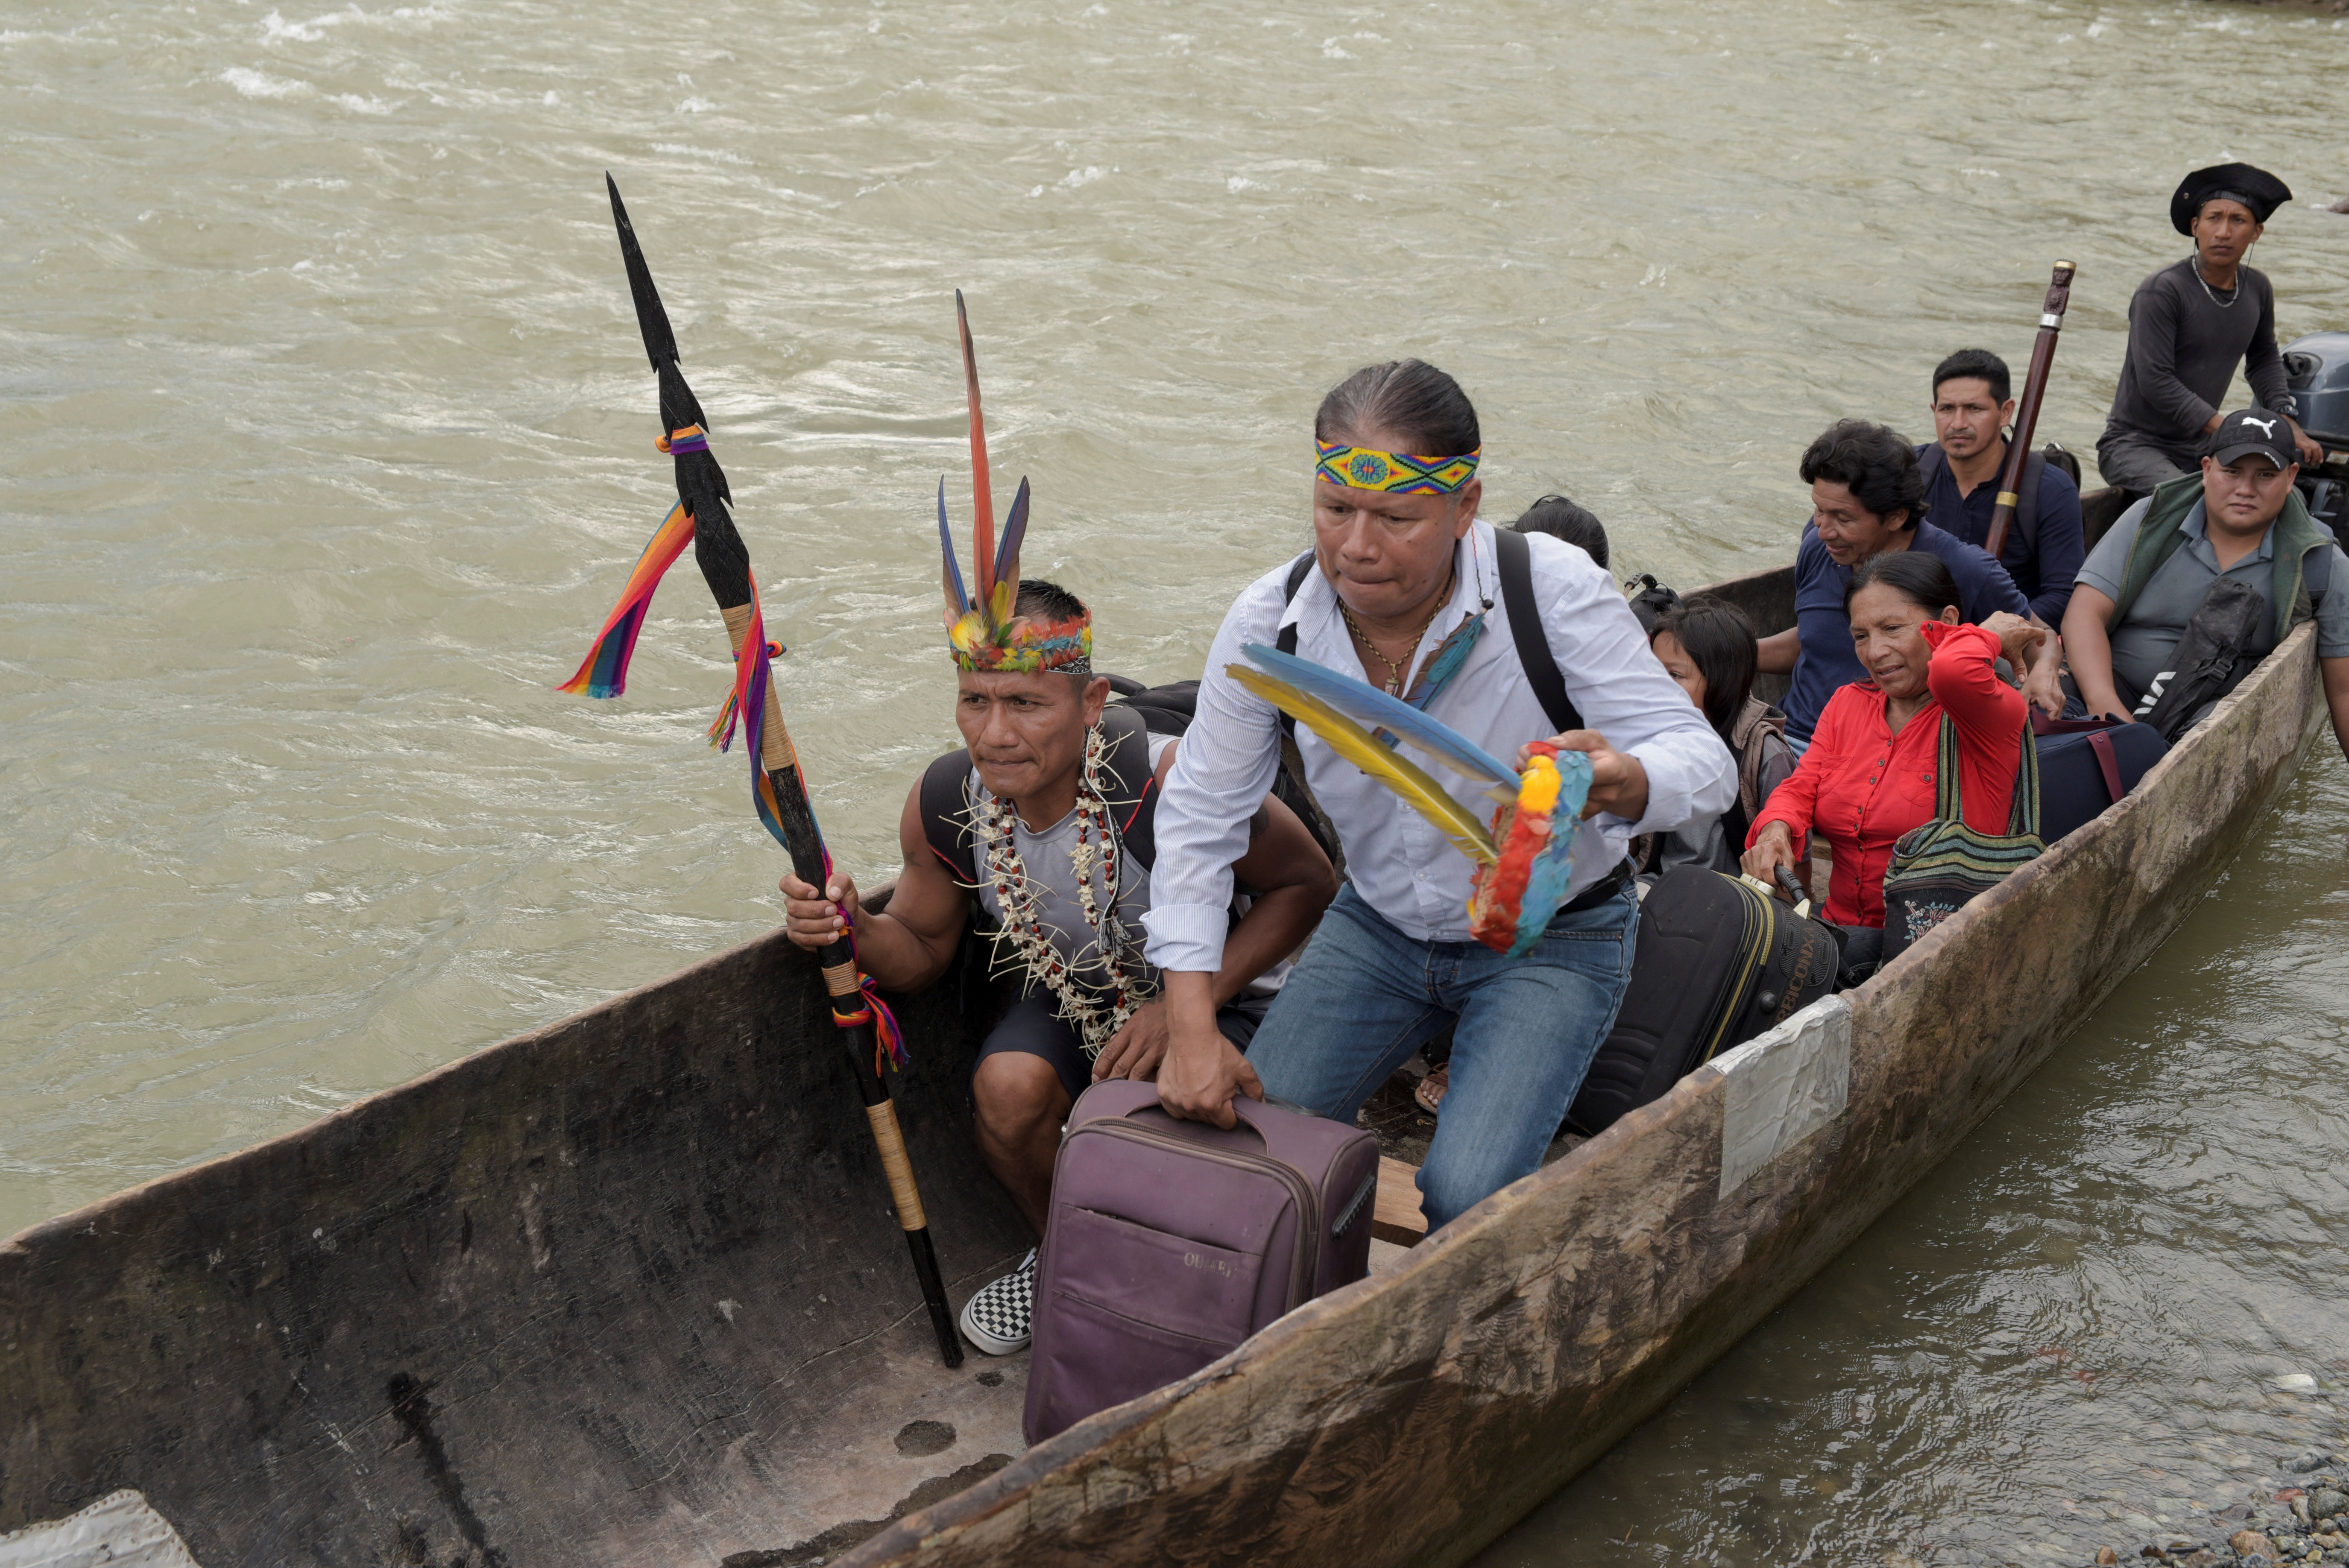 Indigenous Ecuadoreans to speak at Constitutional Court hearing on mining and oil exploration in Sinango